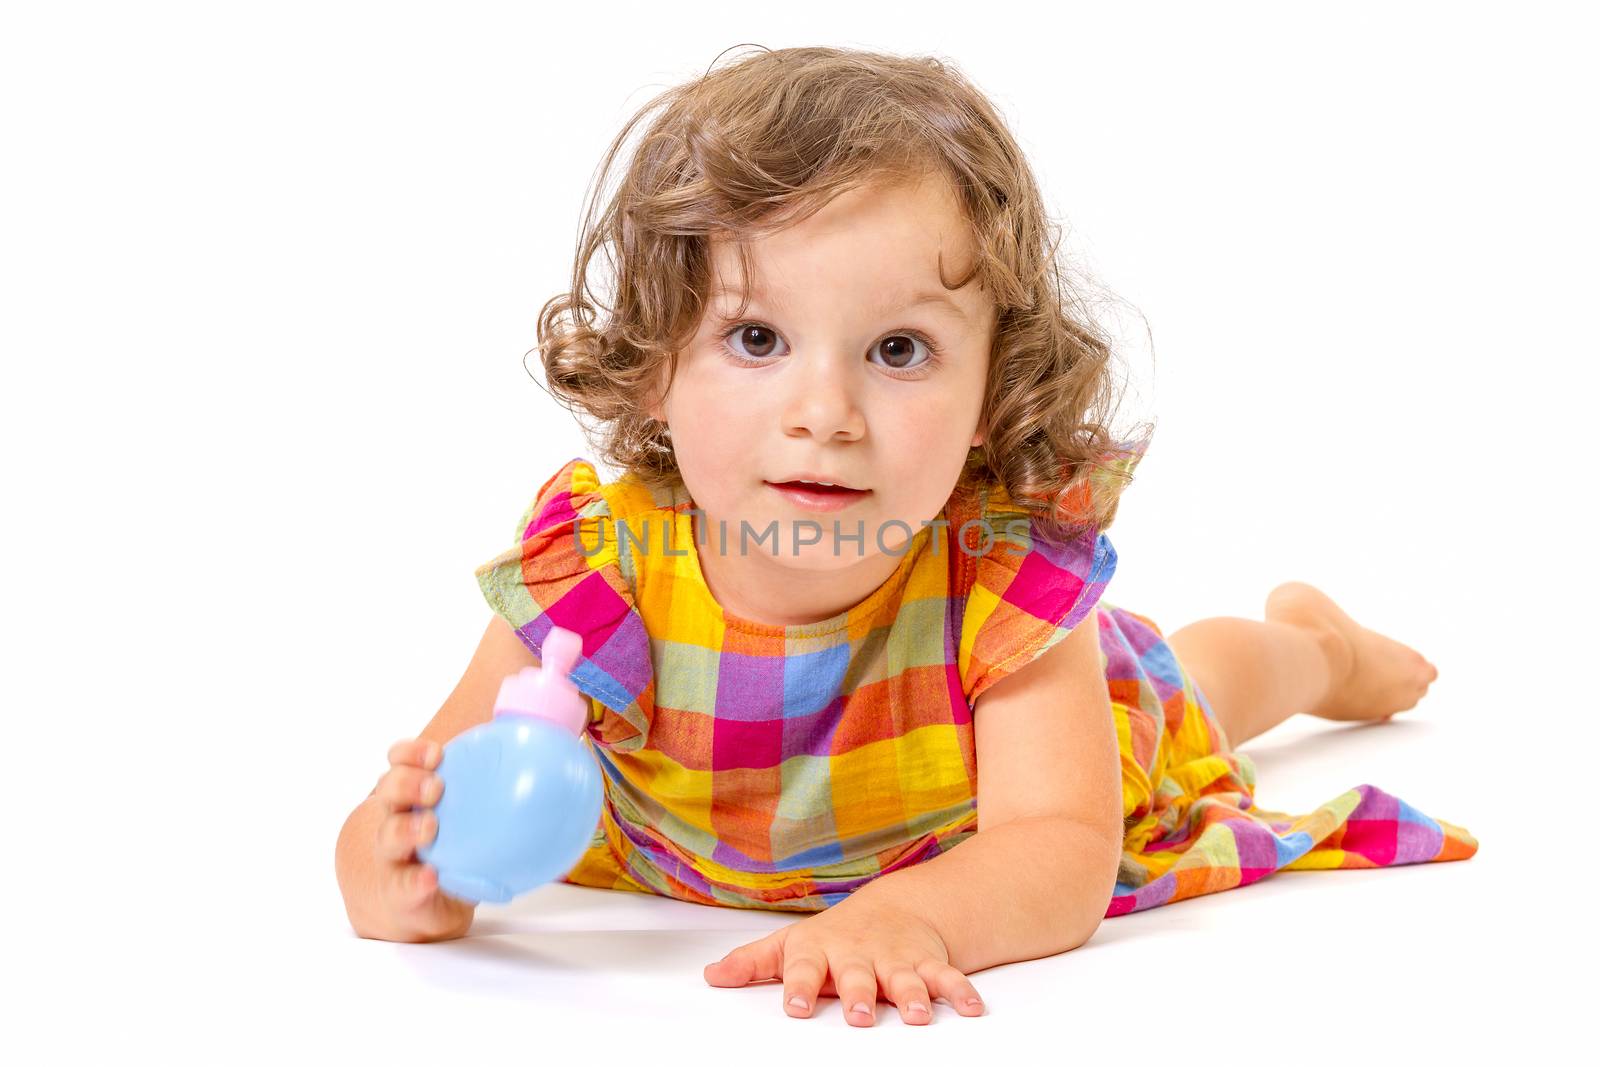 Cheerful little girl smiling at camera lying on white background.